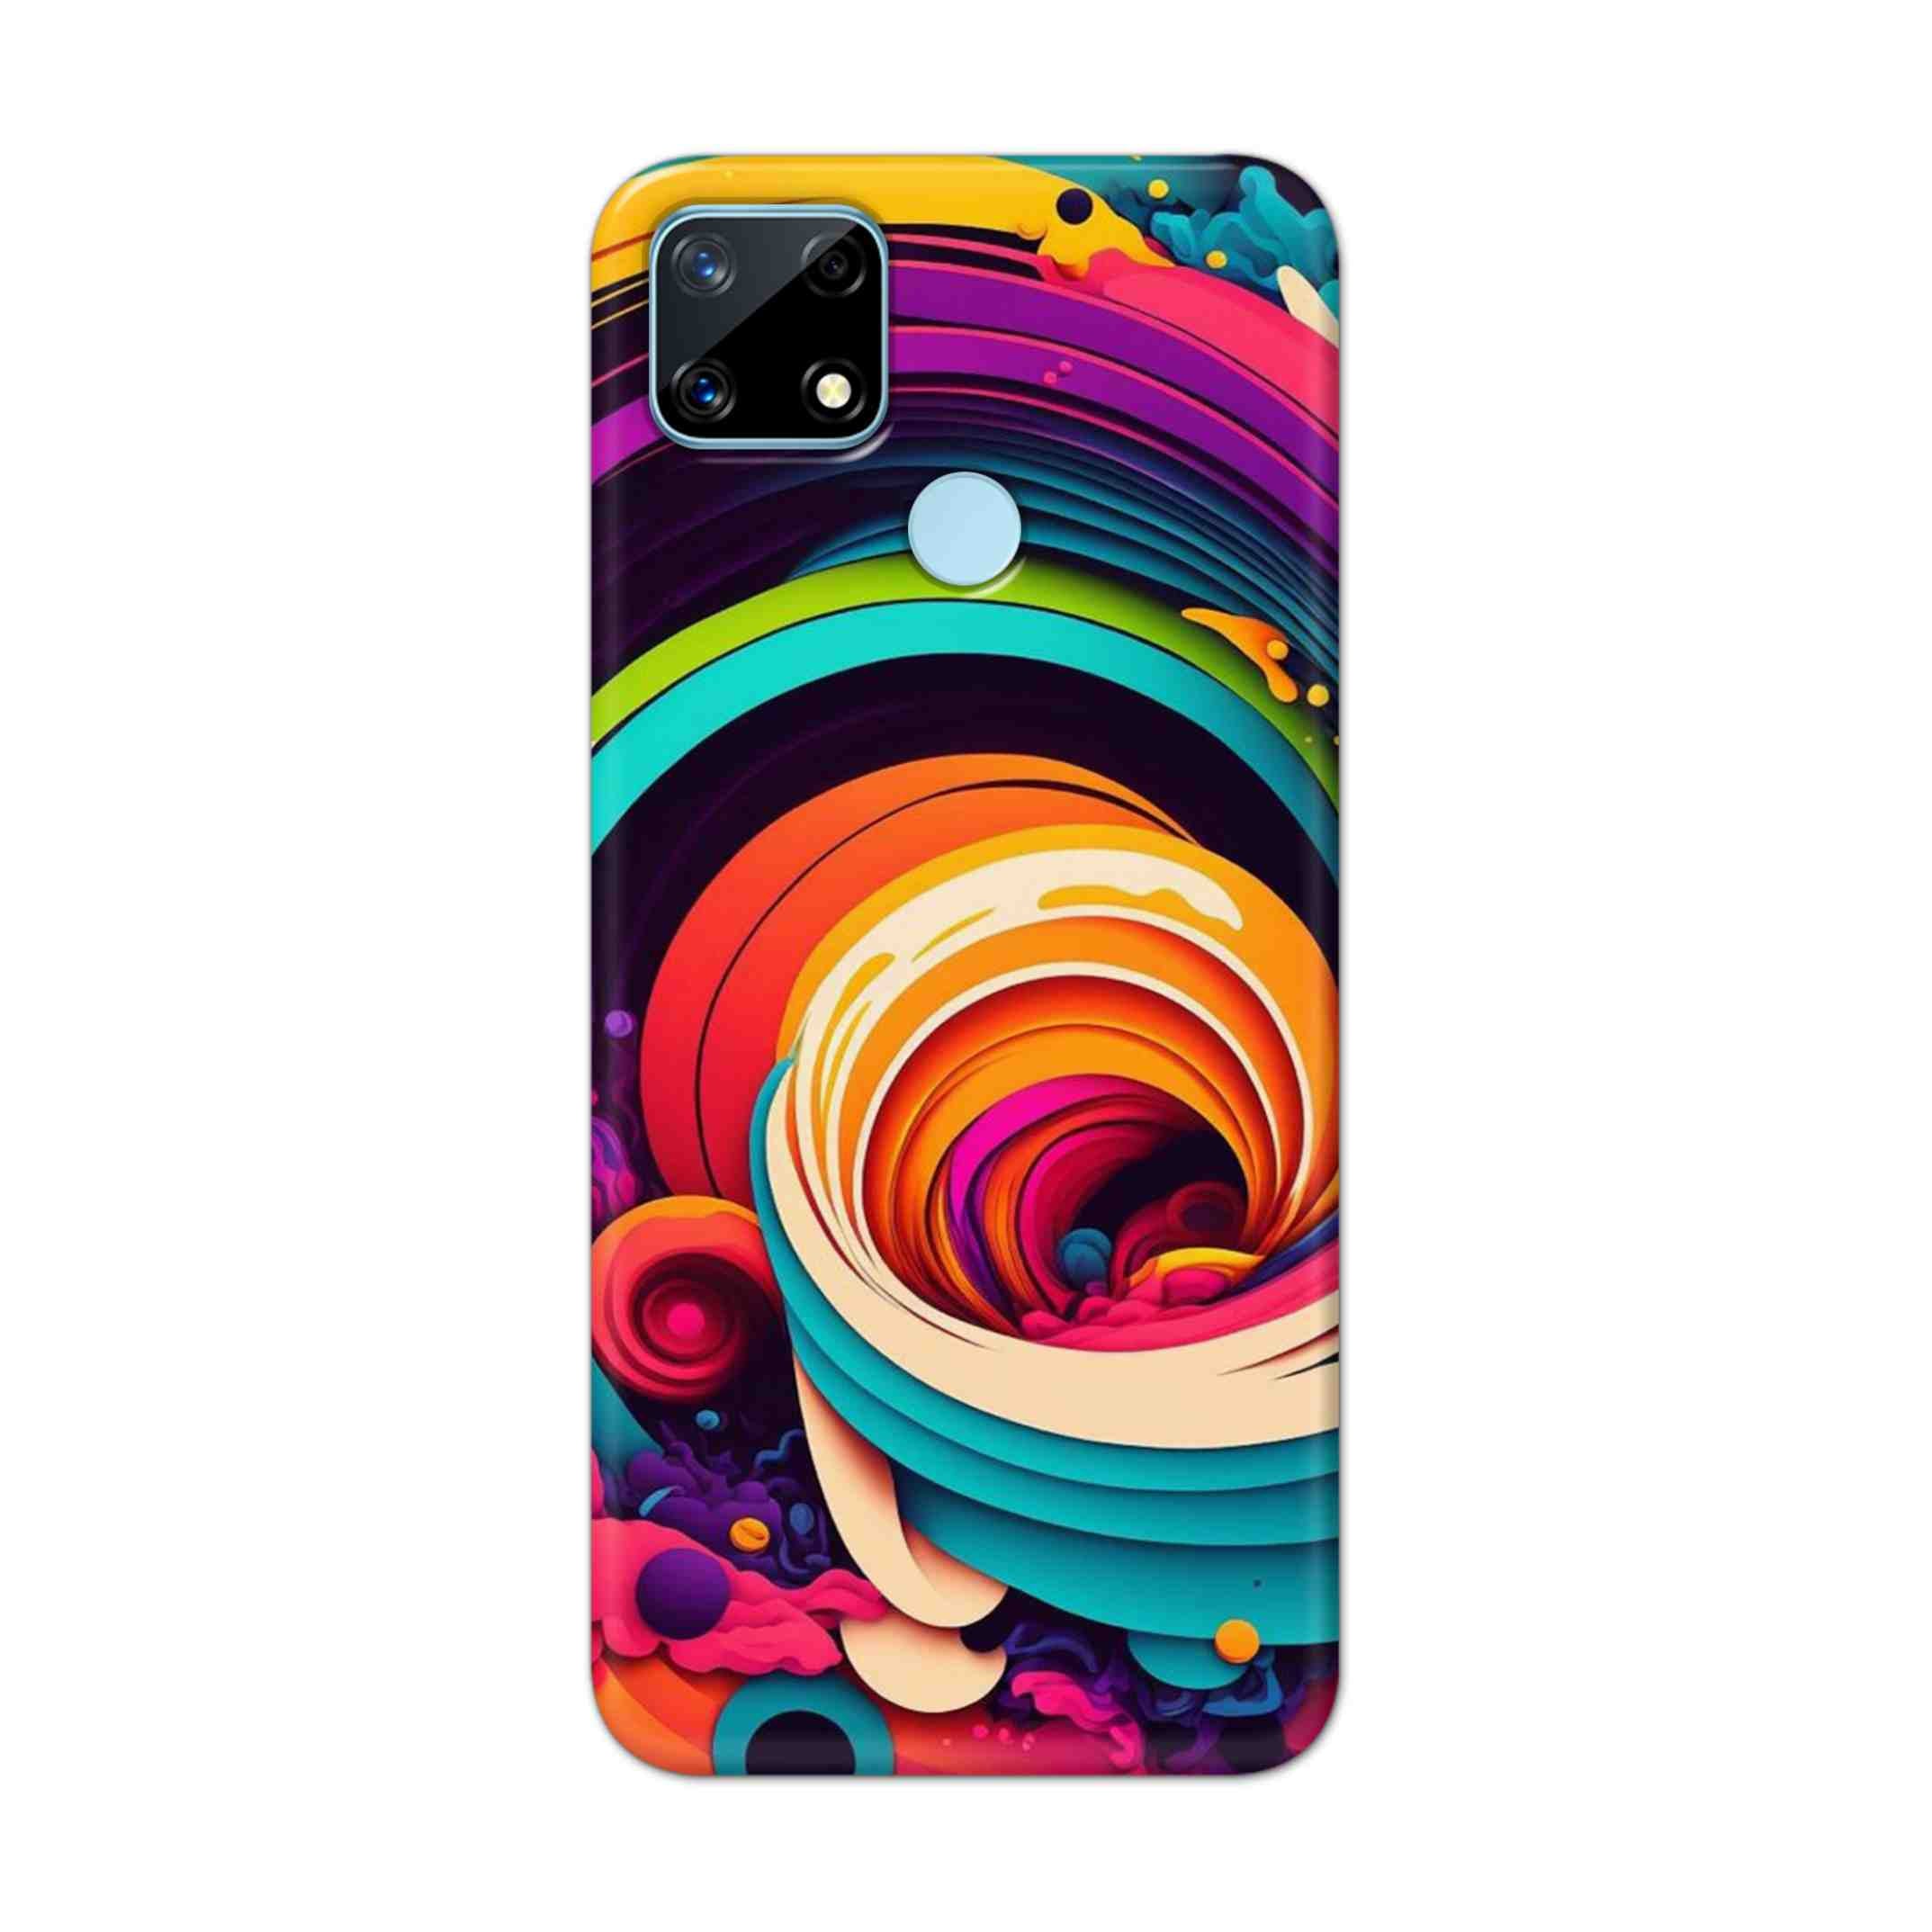 Buy Colour Circle Hard Back Mobile Phone Case Cover For Realme Narzo 20 Online